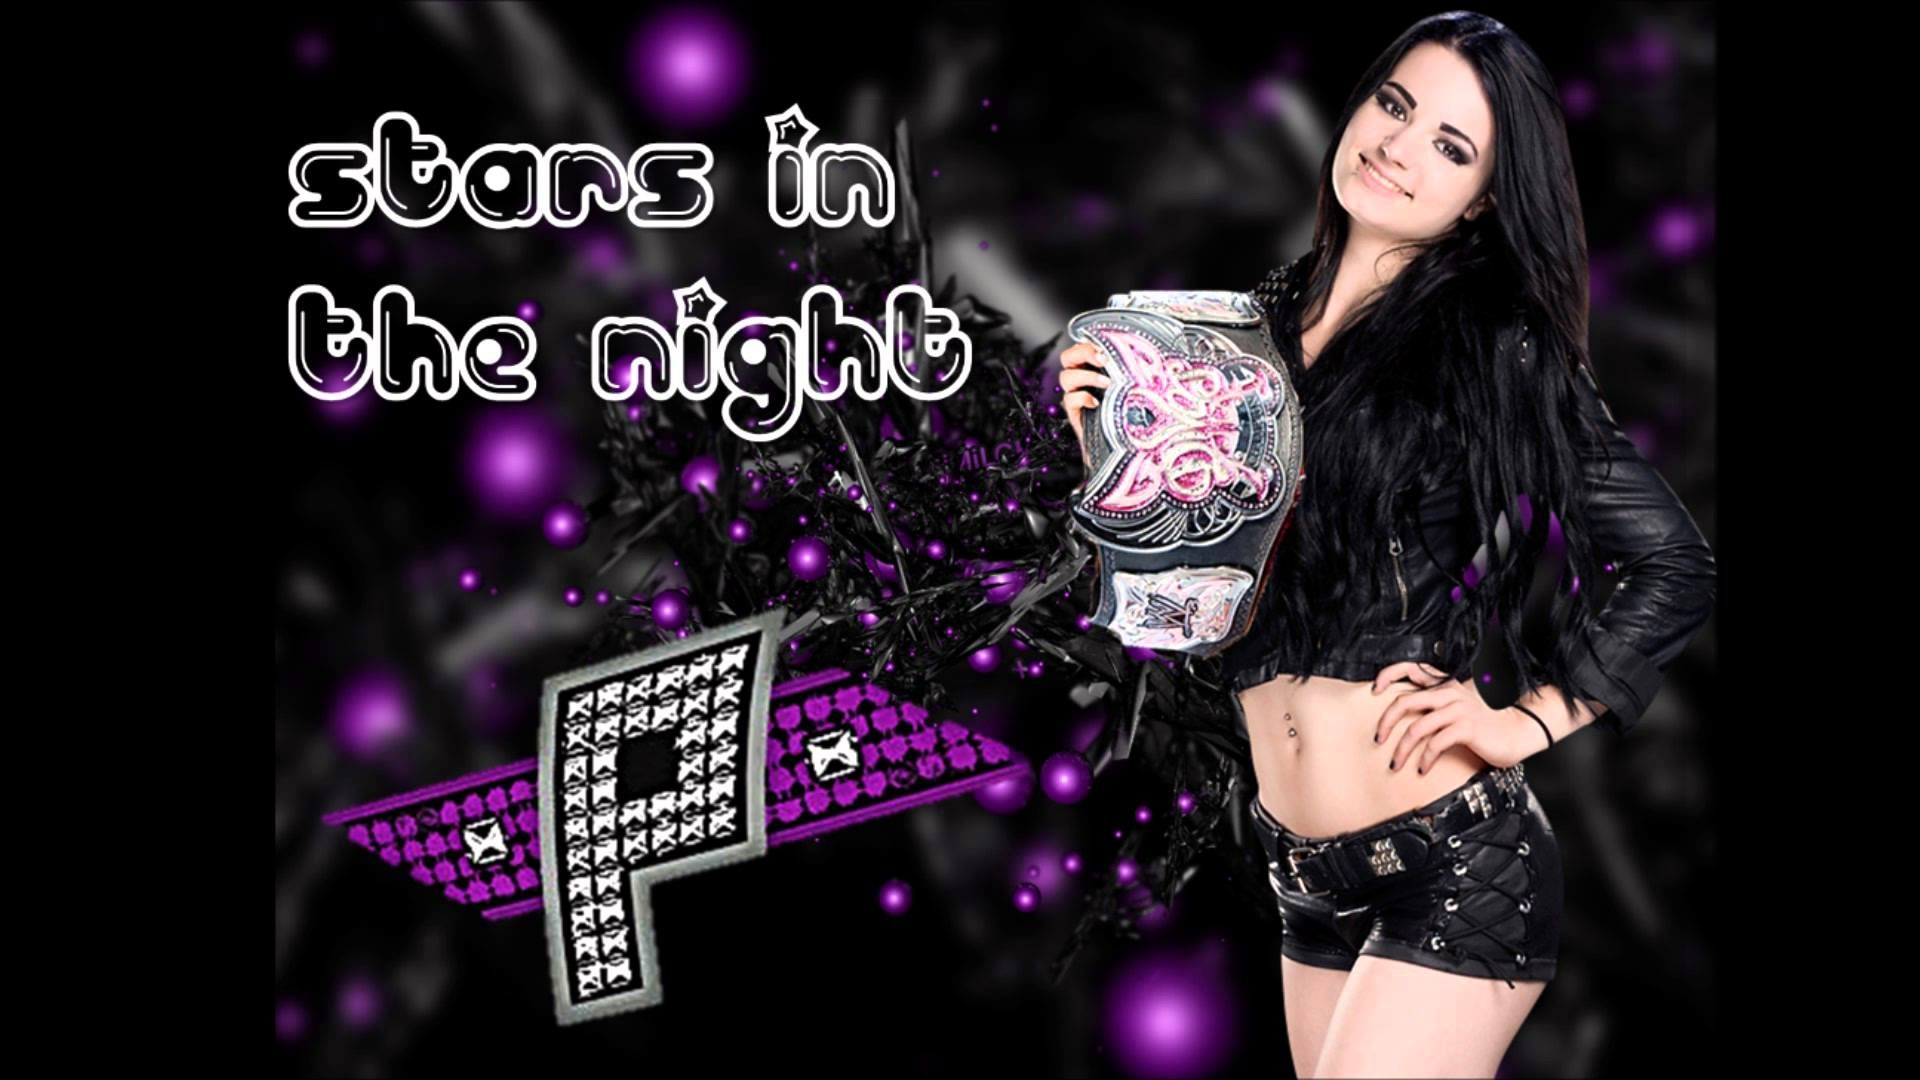 2014 Paige 2nd WWE Theme Song Stars In The Night Download Link – YouTube